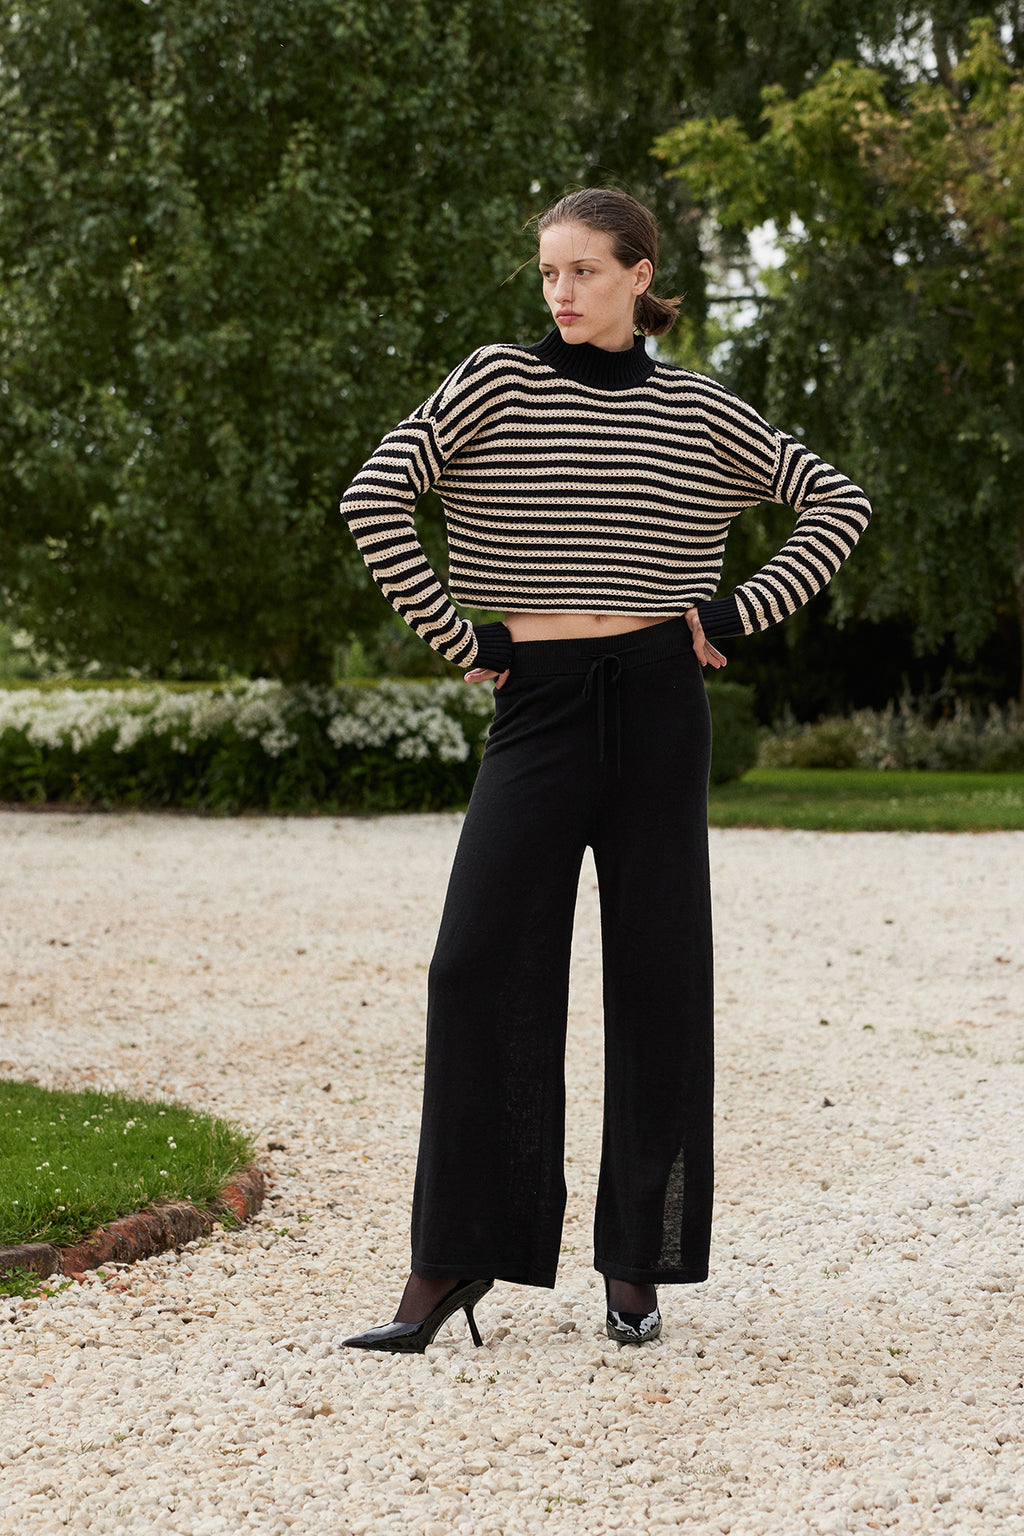 June Cropped Sweater - Sand & Black